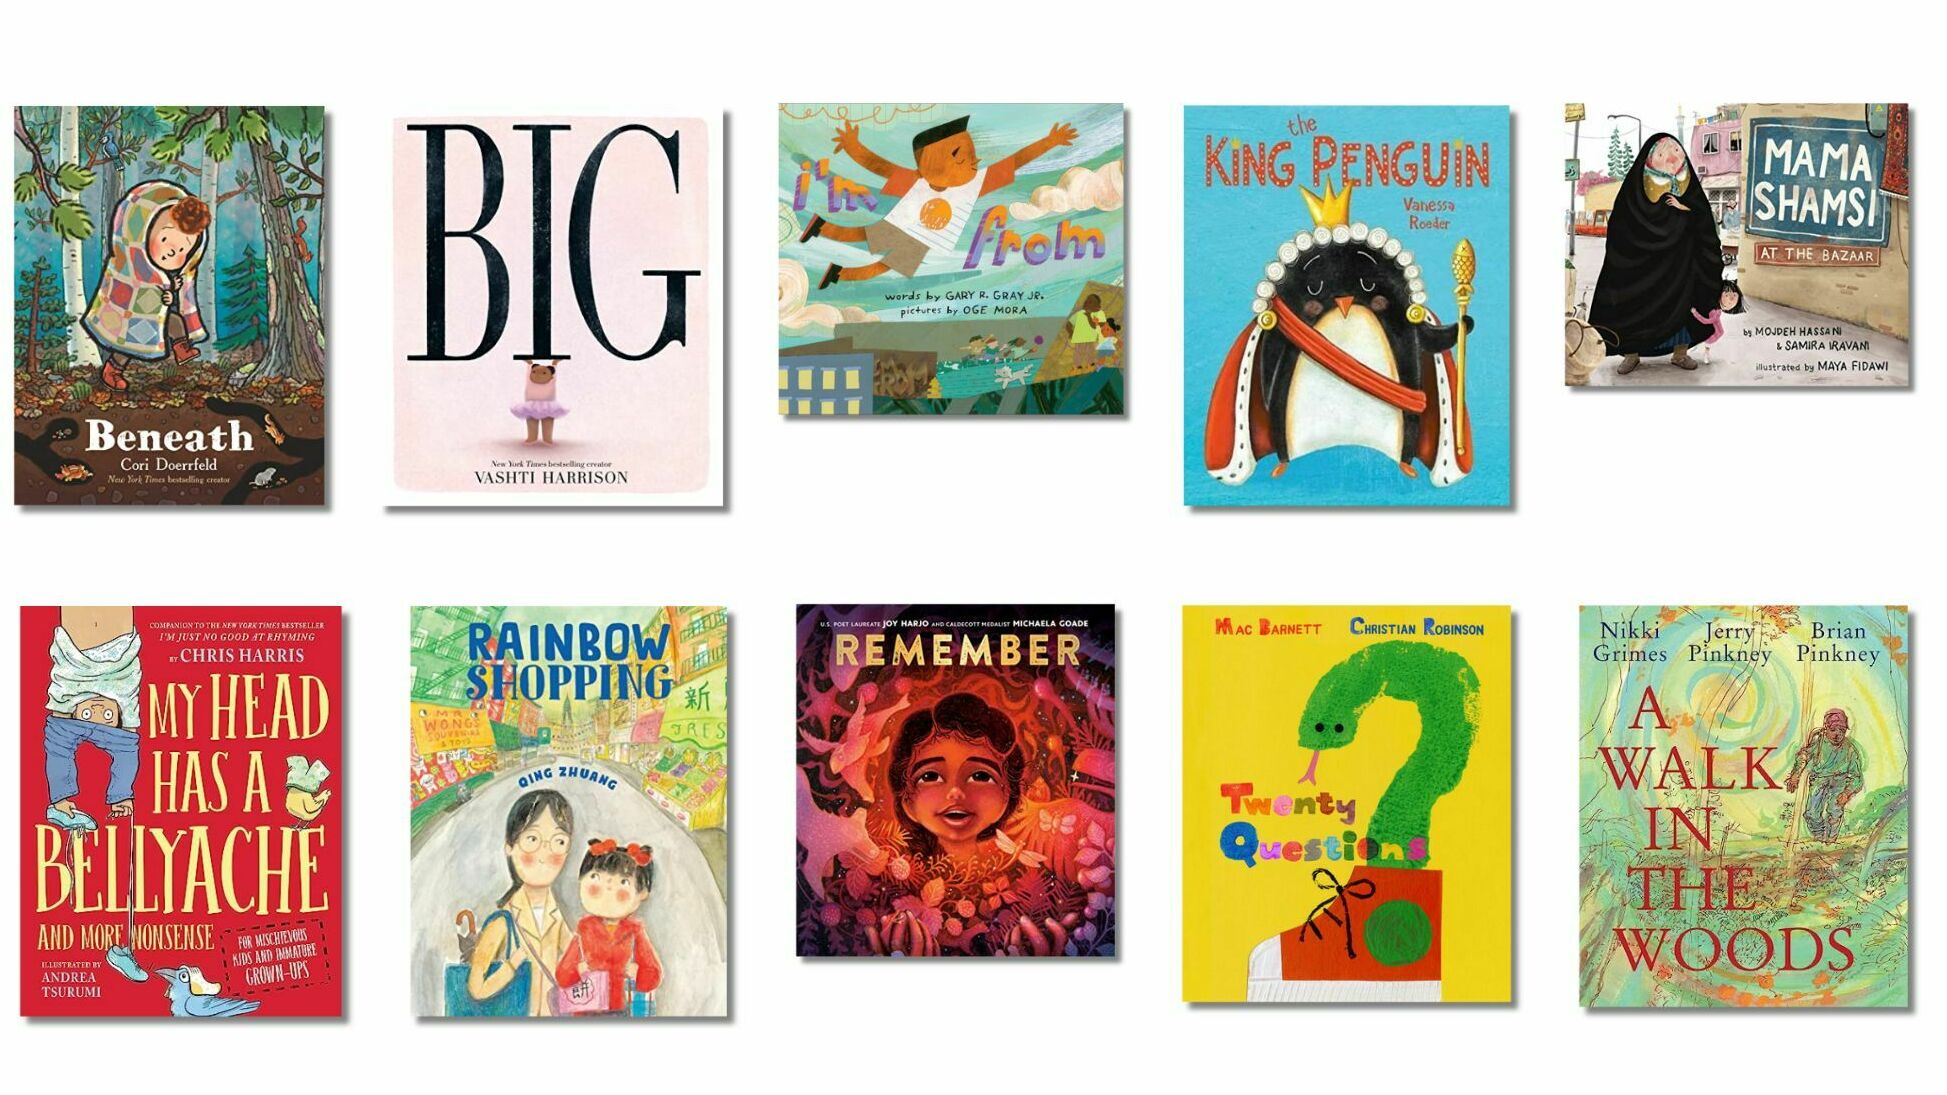 Still shopping for the little ones? Here are 10 kids’ books we loved this year